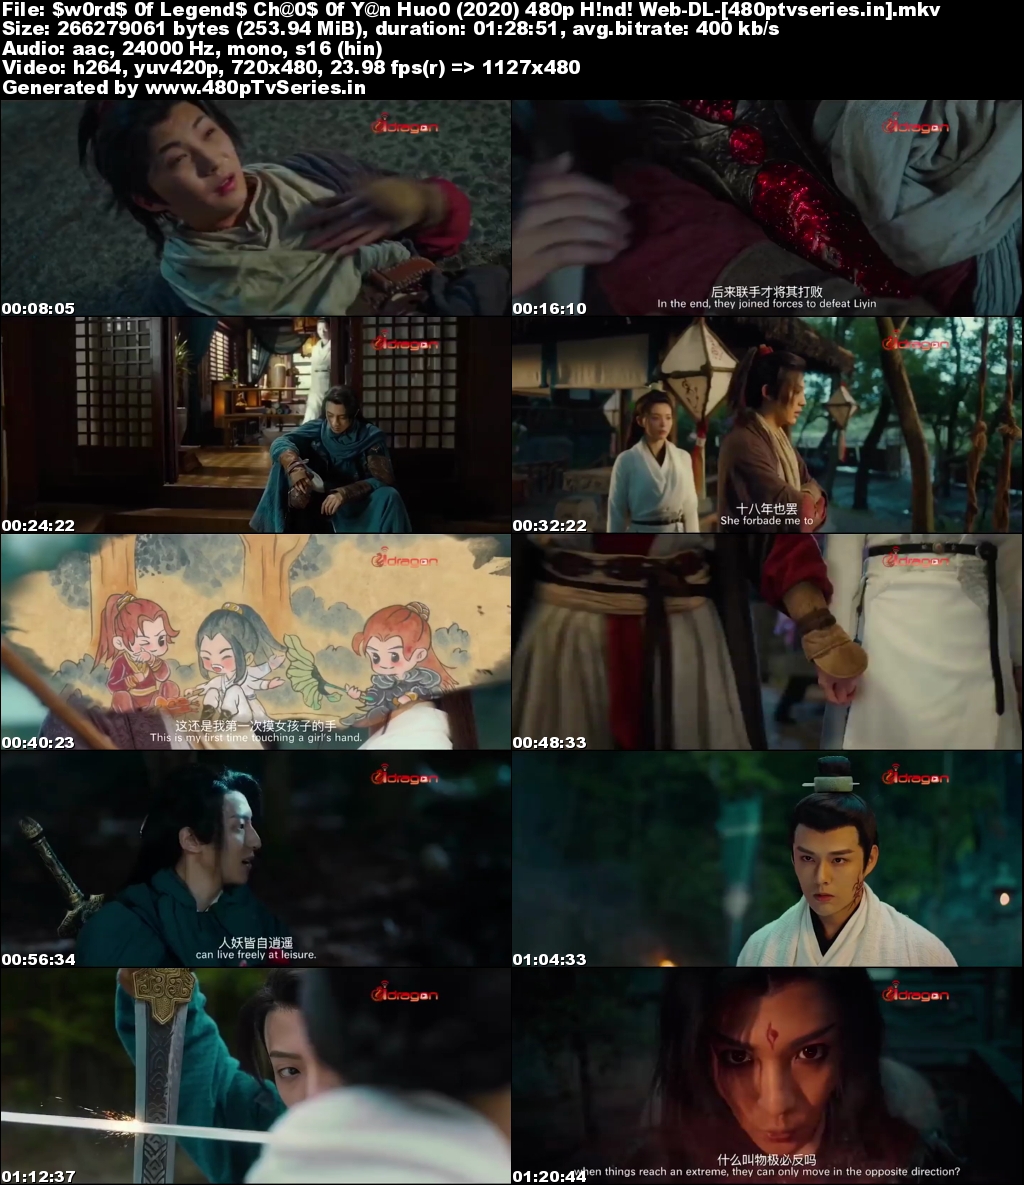 Swords of Legends: Chaos of Yan Huo (2020) 250MB Full Hindi Dubbed Movie Download 480p Web-DL Free Watch Online Full Movie Download Worldfree4u 9xmovies